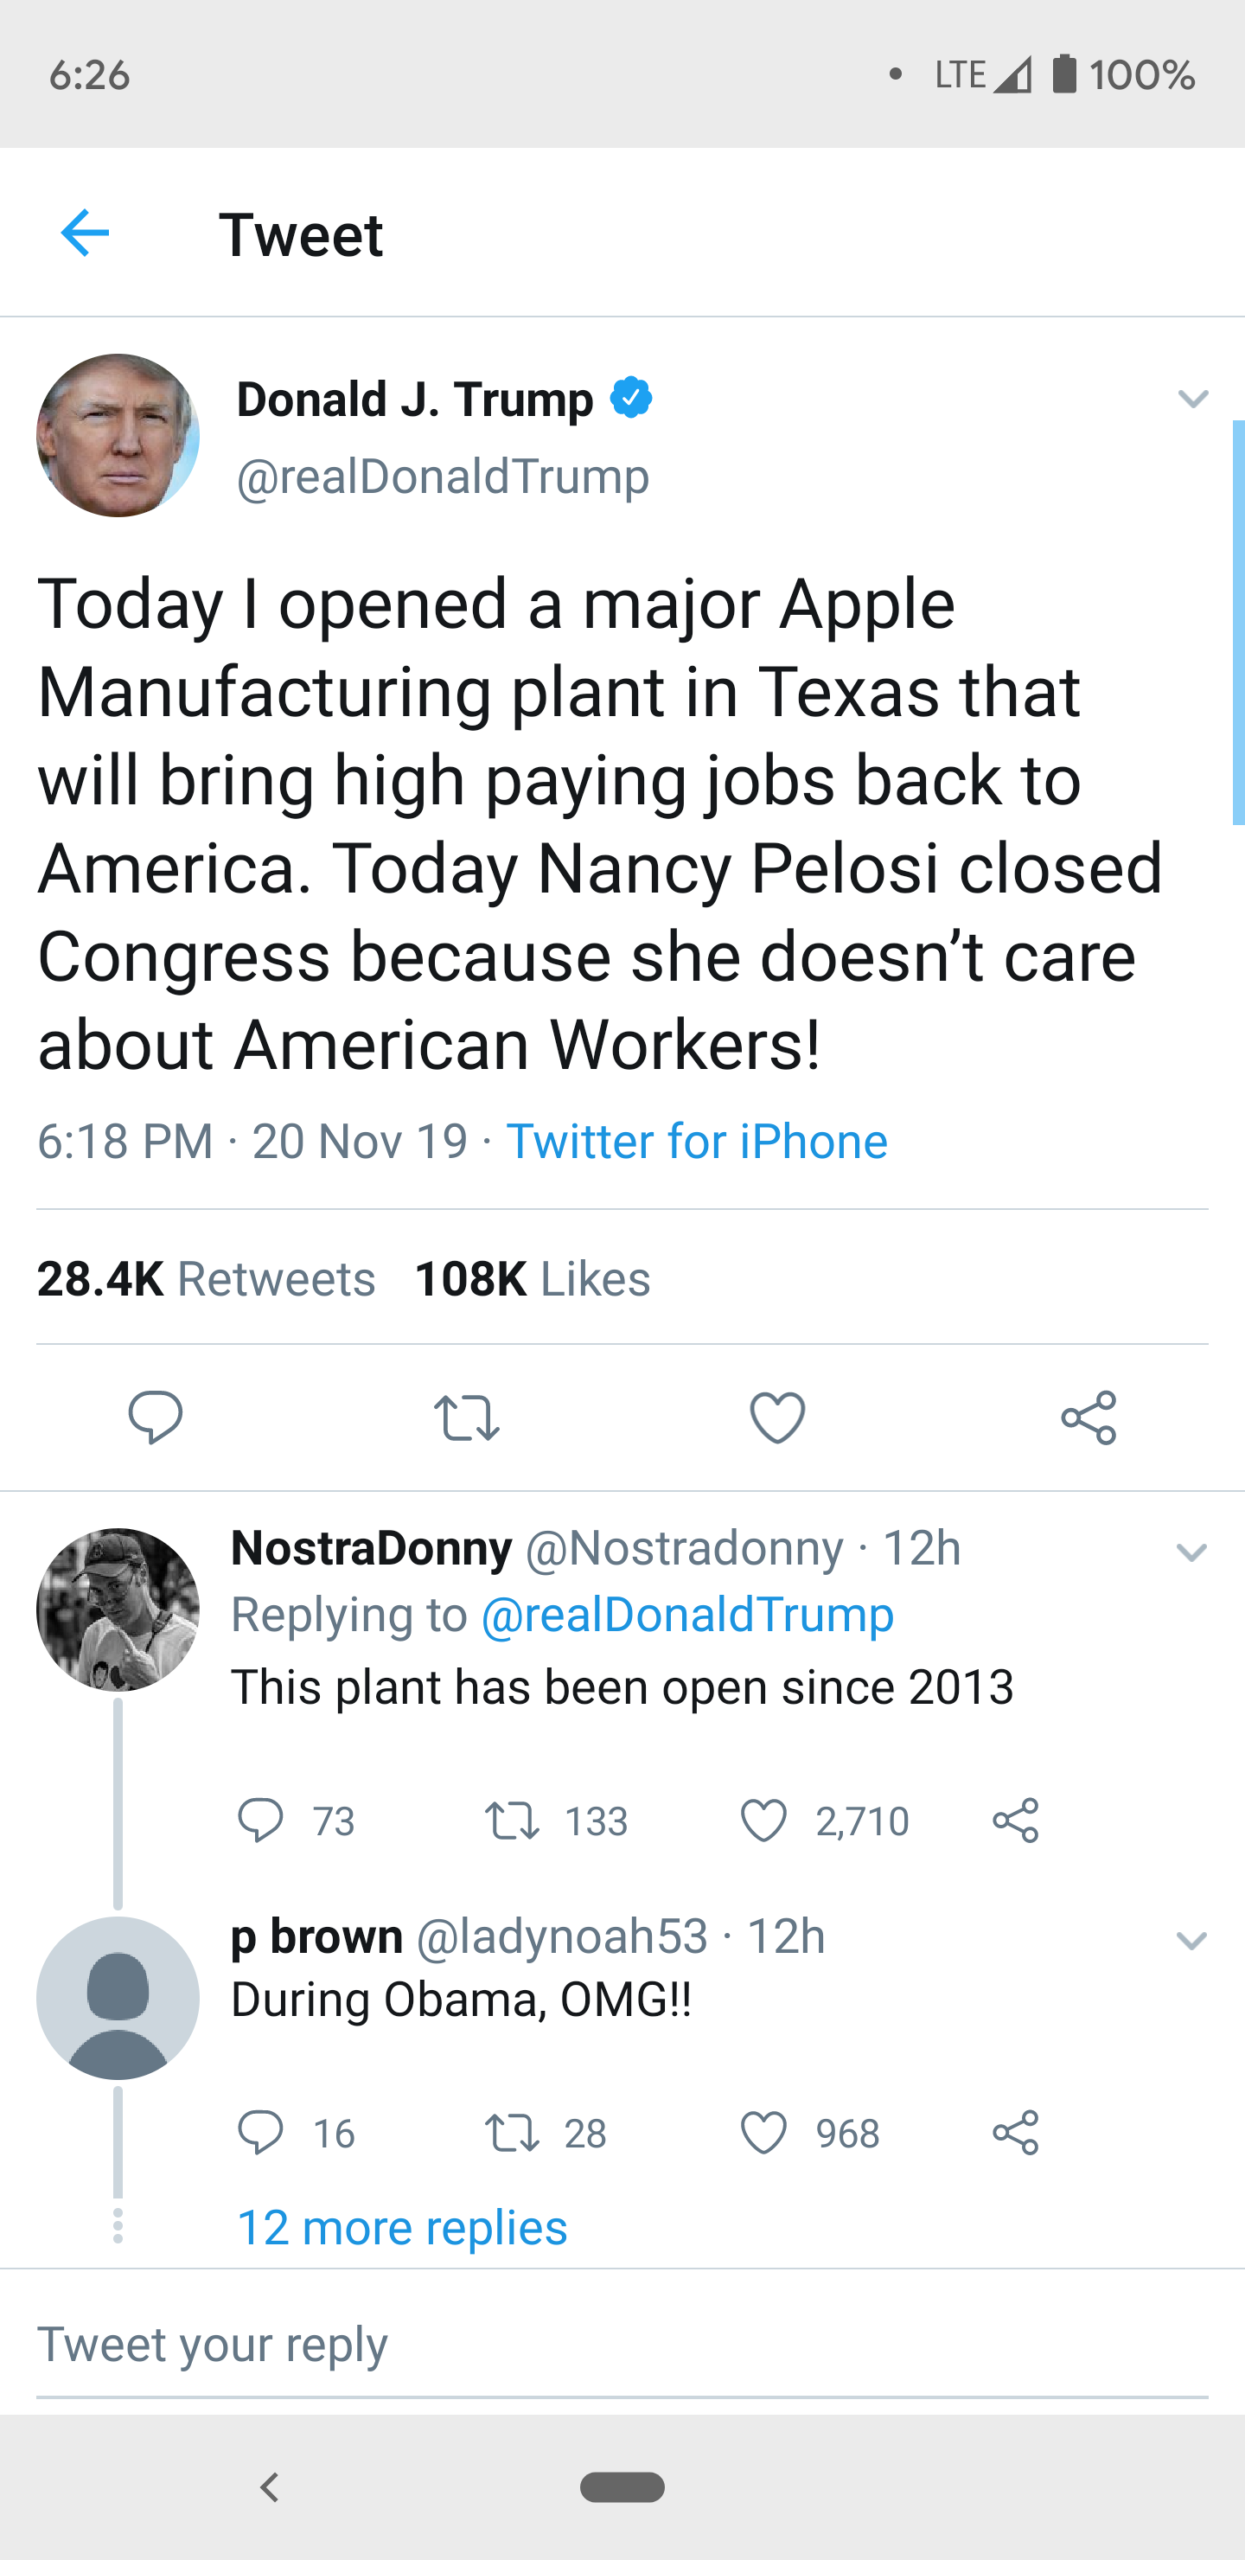 political political-memes political text: 6:26 100% Tweet Donald J. Trump @reaIDonaIdTrump Today I opened a major Apple Manufacturing plant in Texas that will bring high paying jobs back to America. Today Nancy Pelosi closed Congress because she doesn't care about American Workers! 6:18 PM • 20 Nov 19 • Twitter for iPhone Likes 28.4K 108K Retweets NostraDonny @Nostradonny • 12h Replying to @reaIDonaIdTrump This plant has been open since 2013 0 73 133 0 2,710 p brown @Iadynoah53 • 12h During Obama, OMG!! 0 16 28 0 968 12 more replies Tweet your reply 